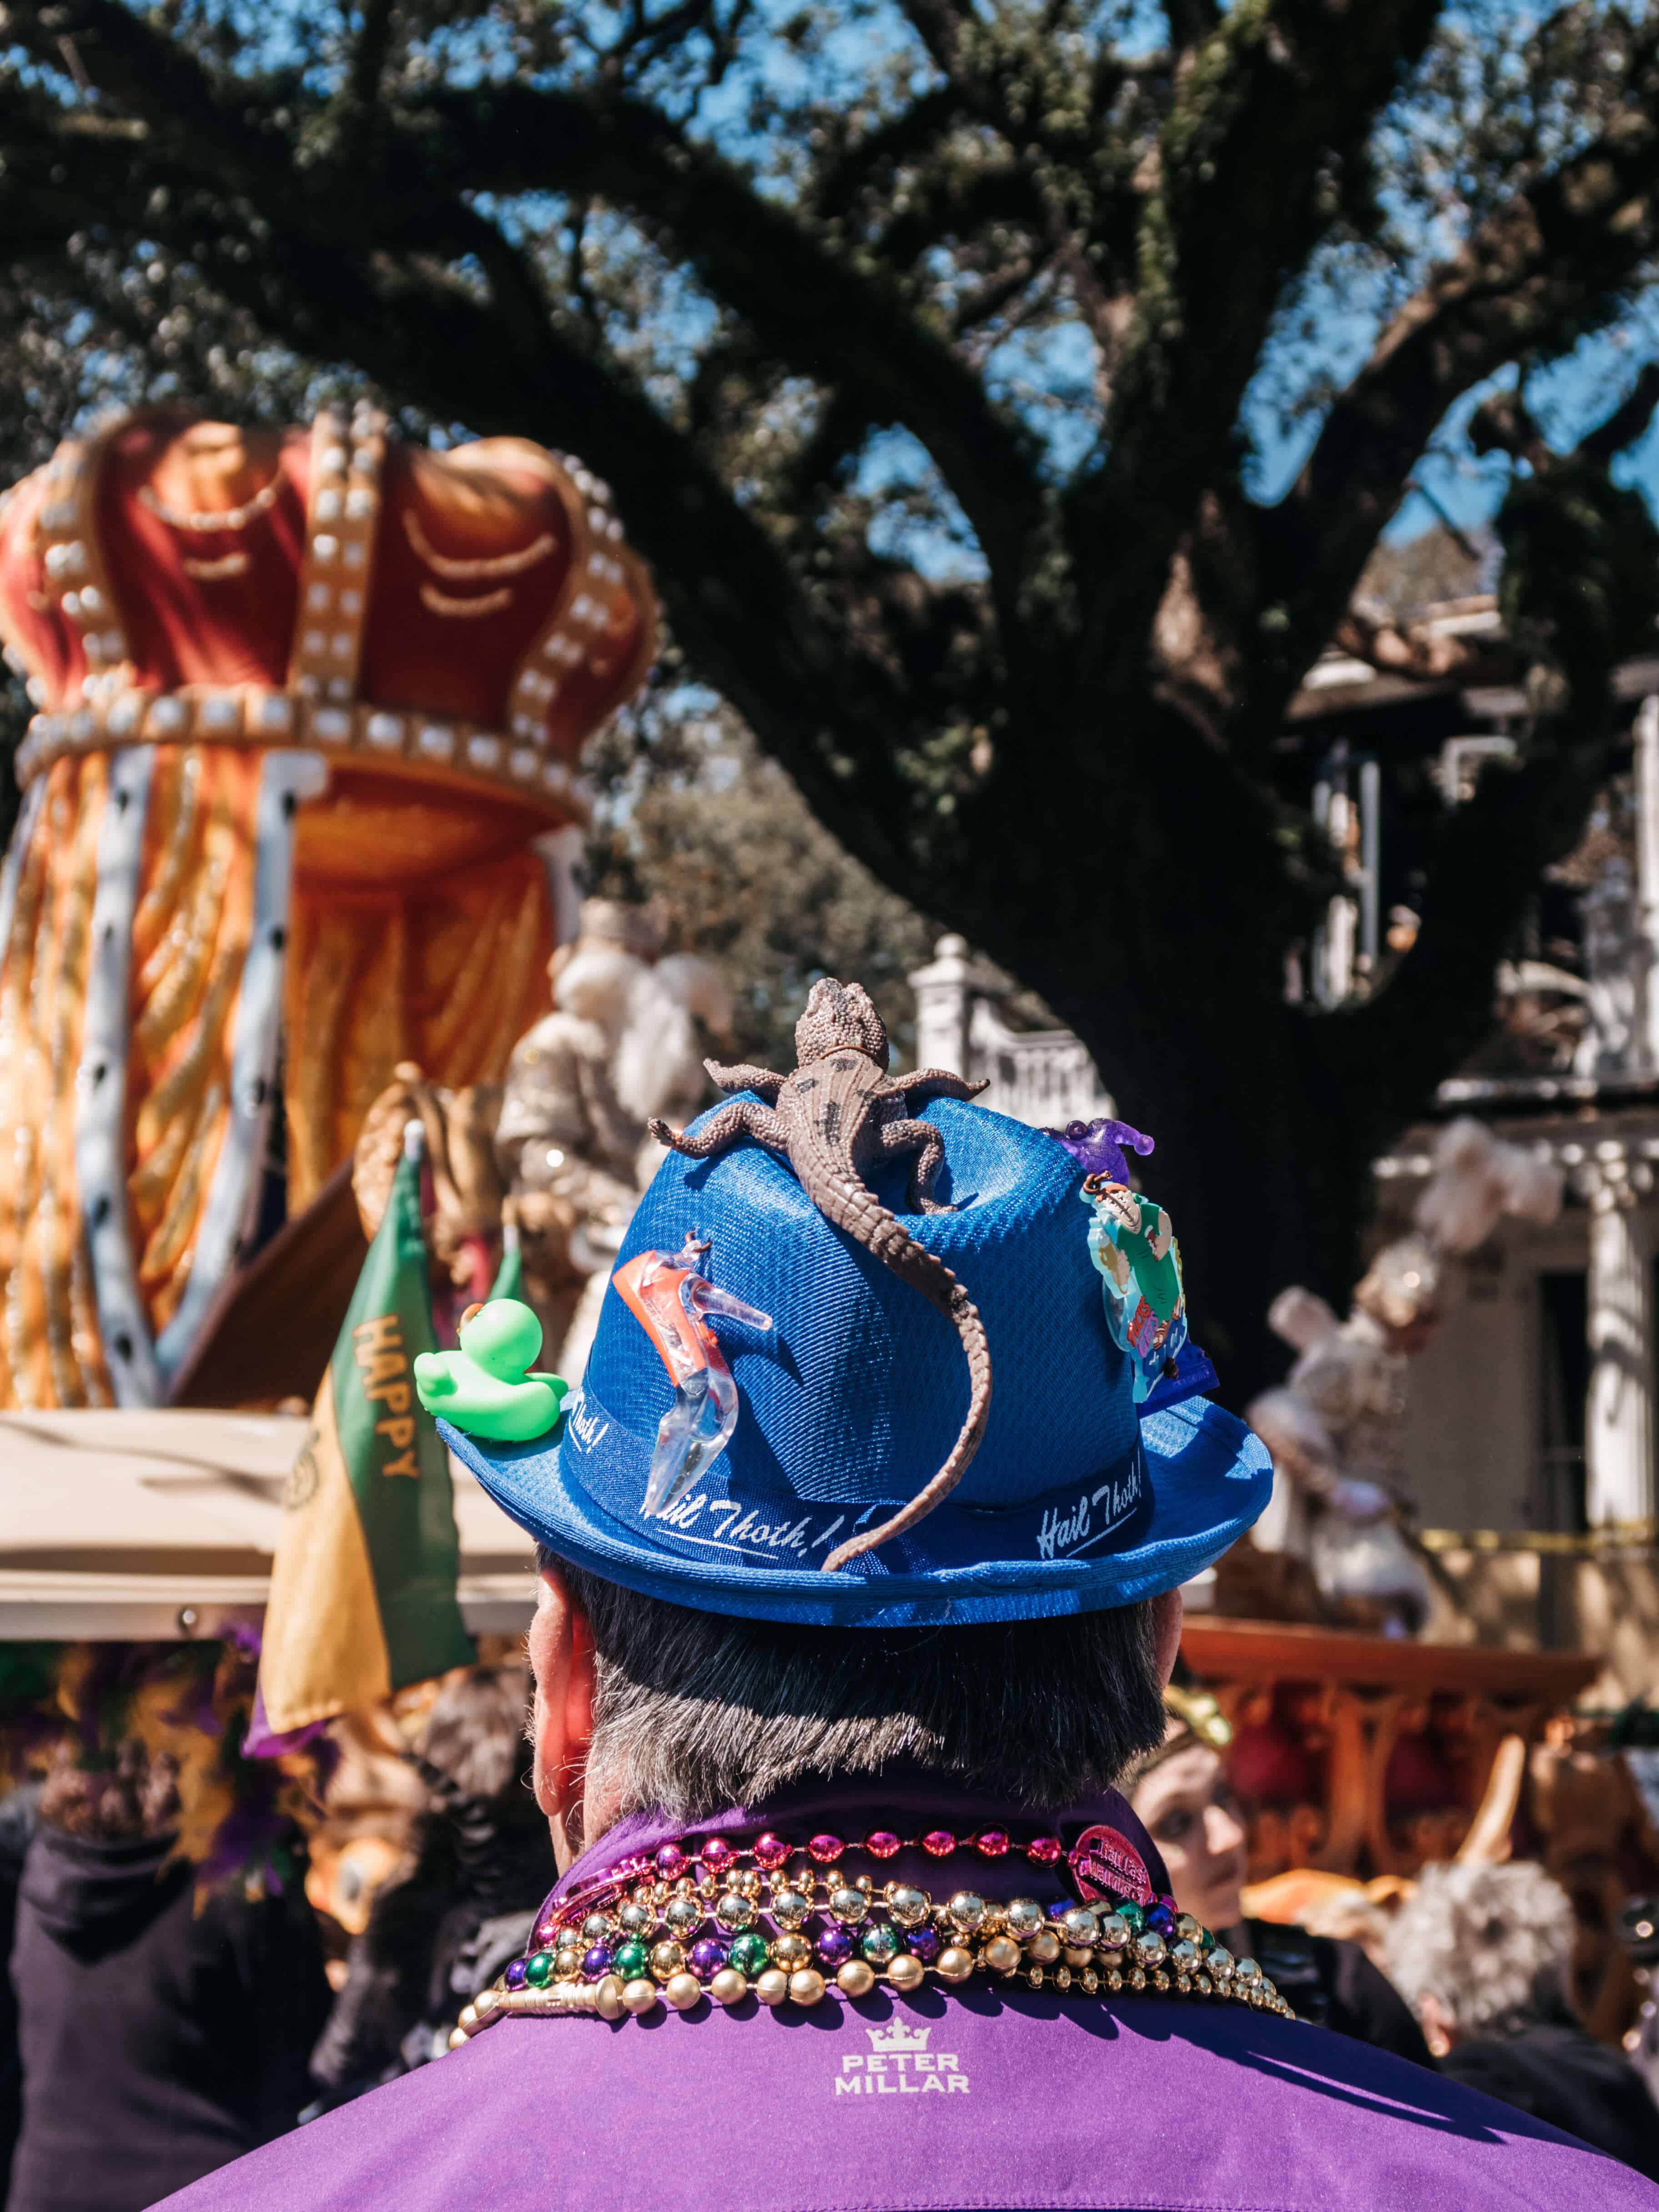 Lizard Hat Costume on Fat Tuesday | What to Expect at Mardi Gras